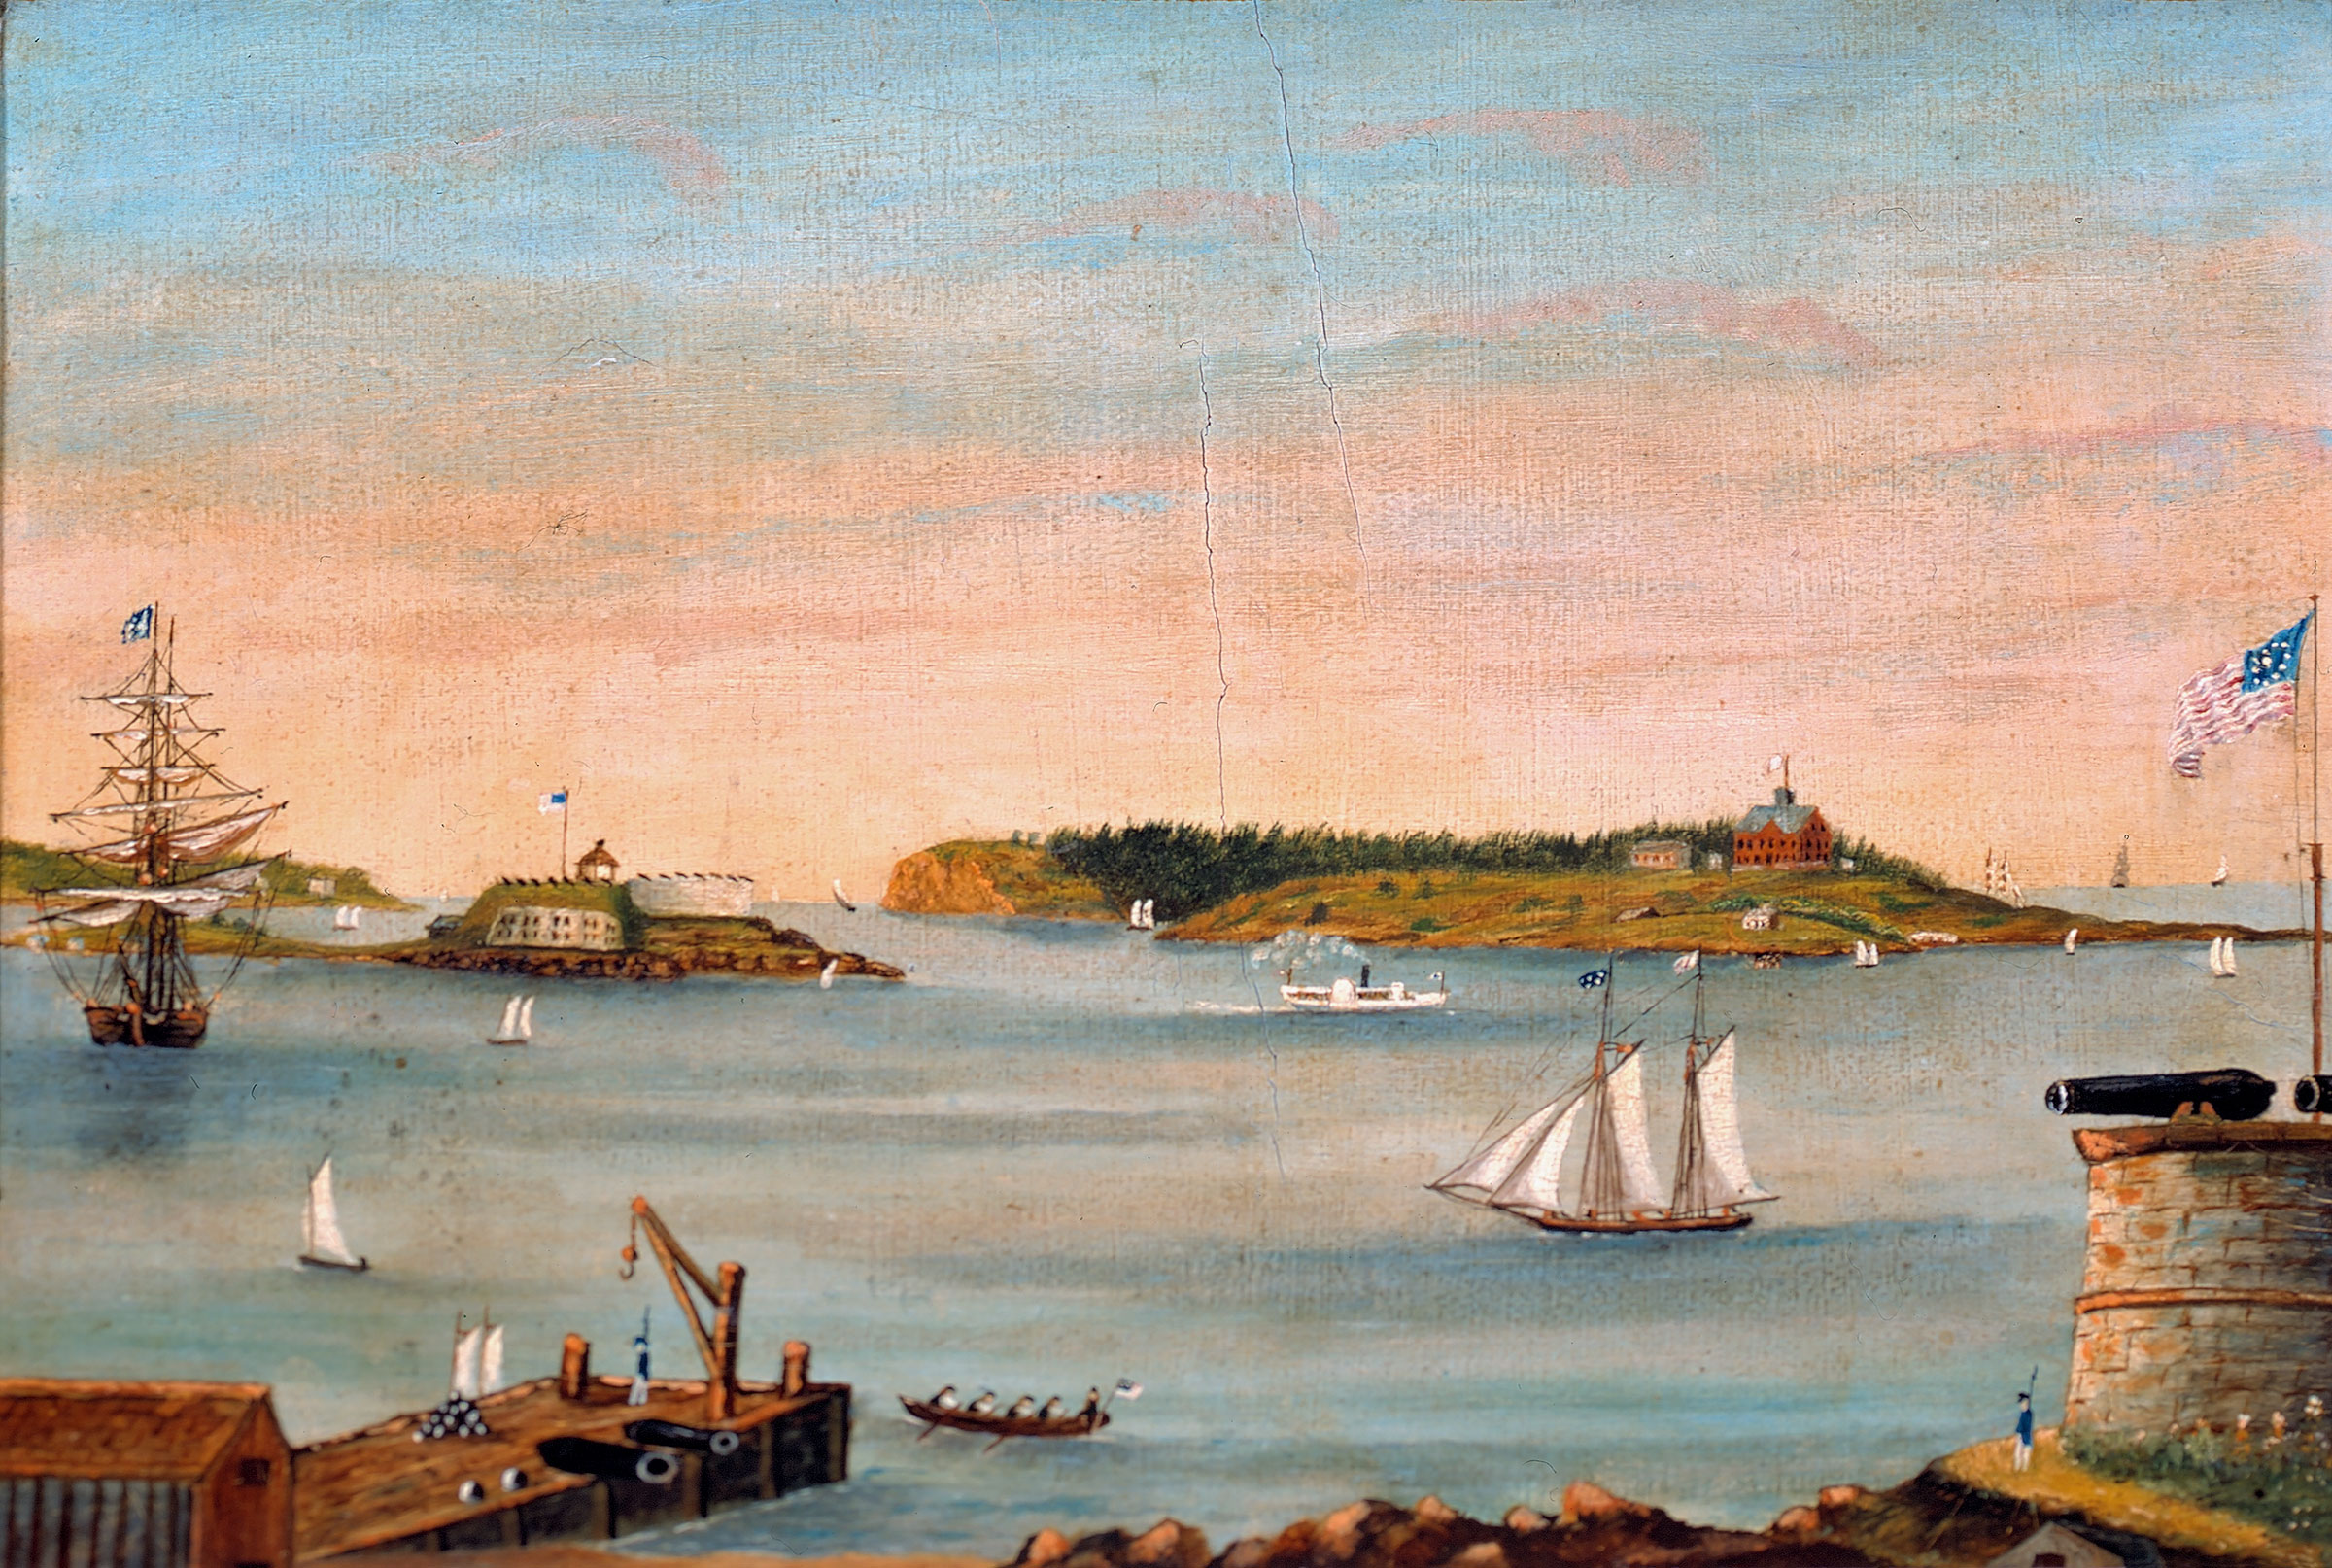 Unidentified artist, View of Portland Harbor, Cushing’s Island and Fort Scammel from Fort Preble, 1853-1862